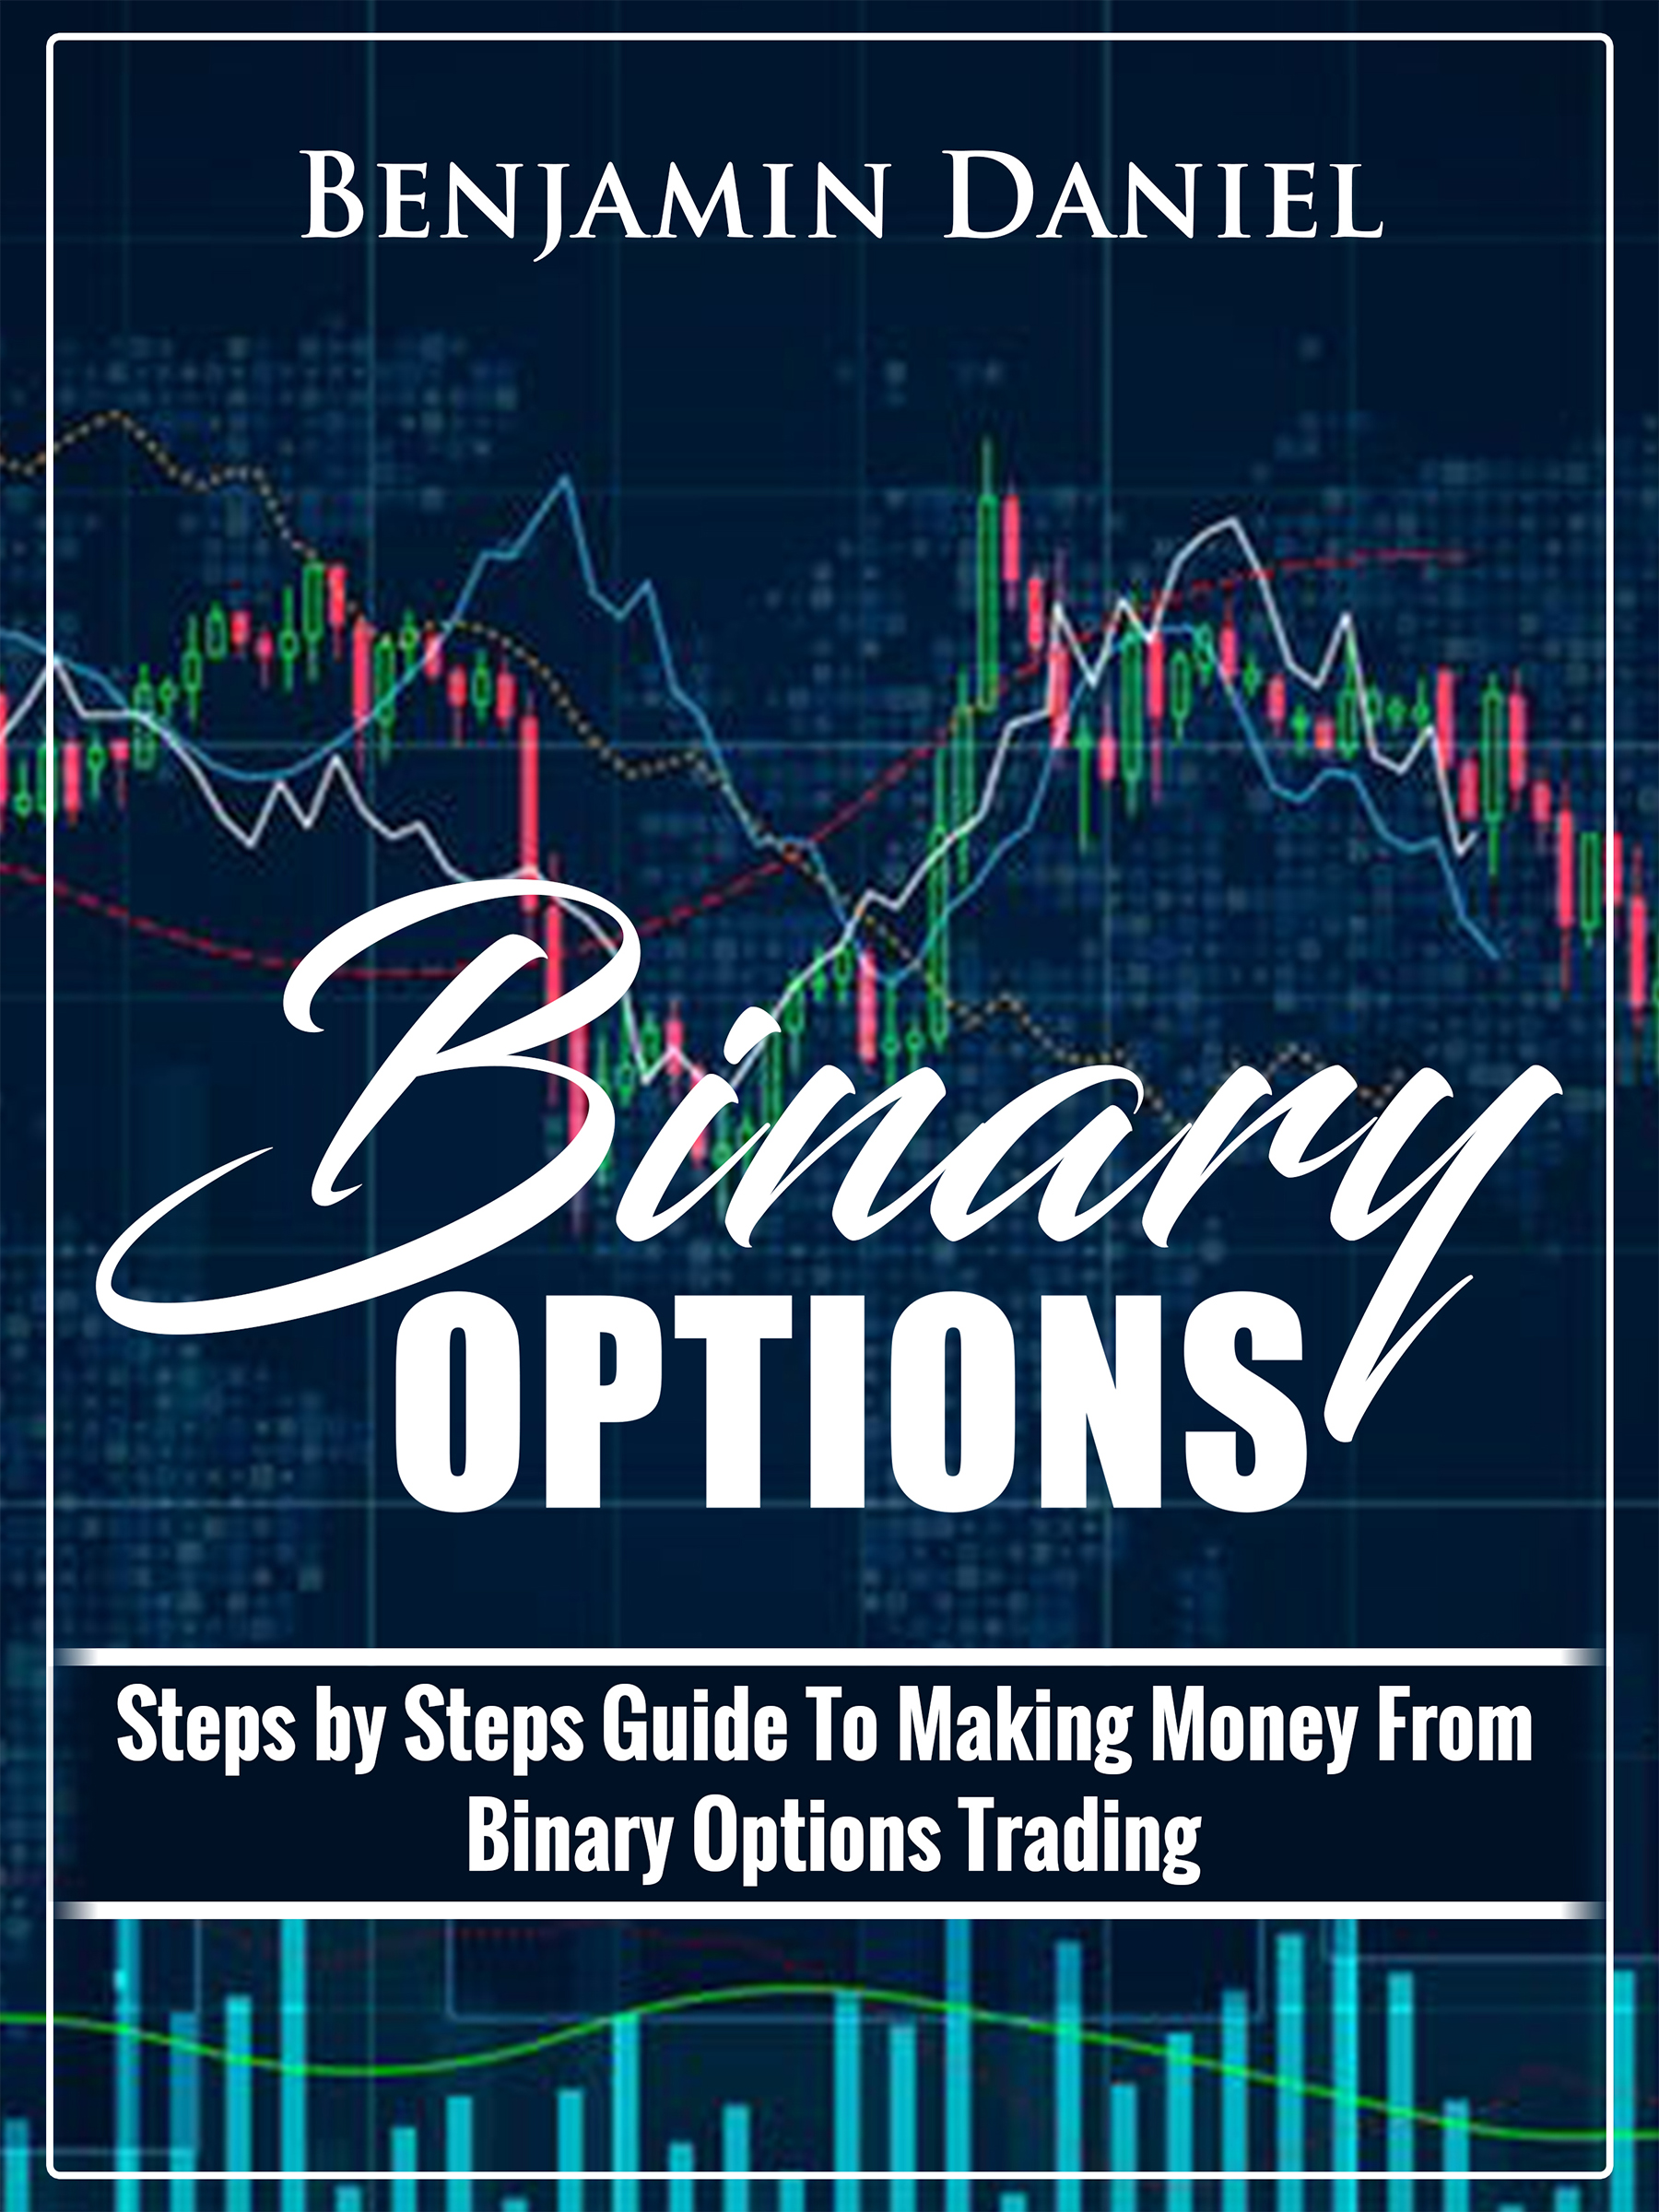 Make money with binary options in 3 simple ways